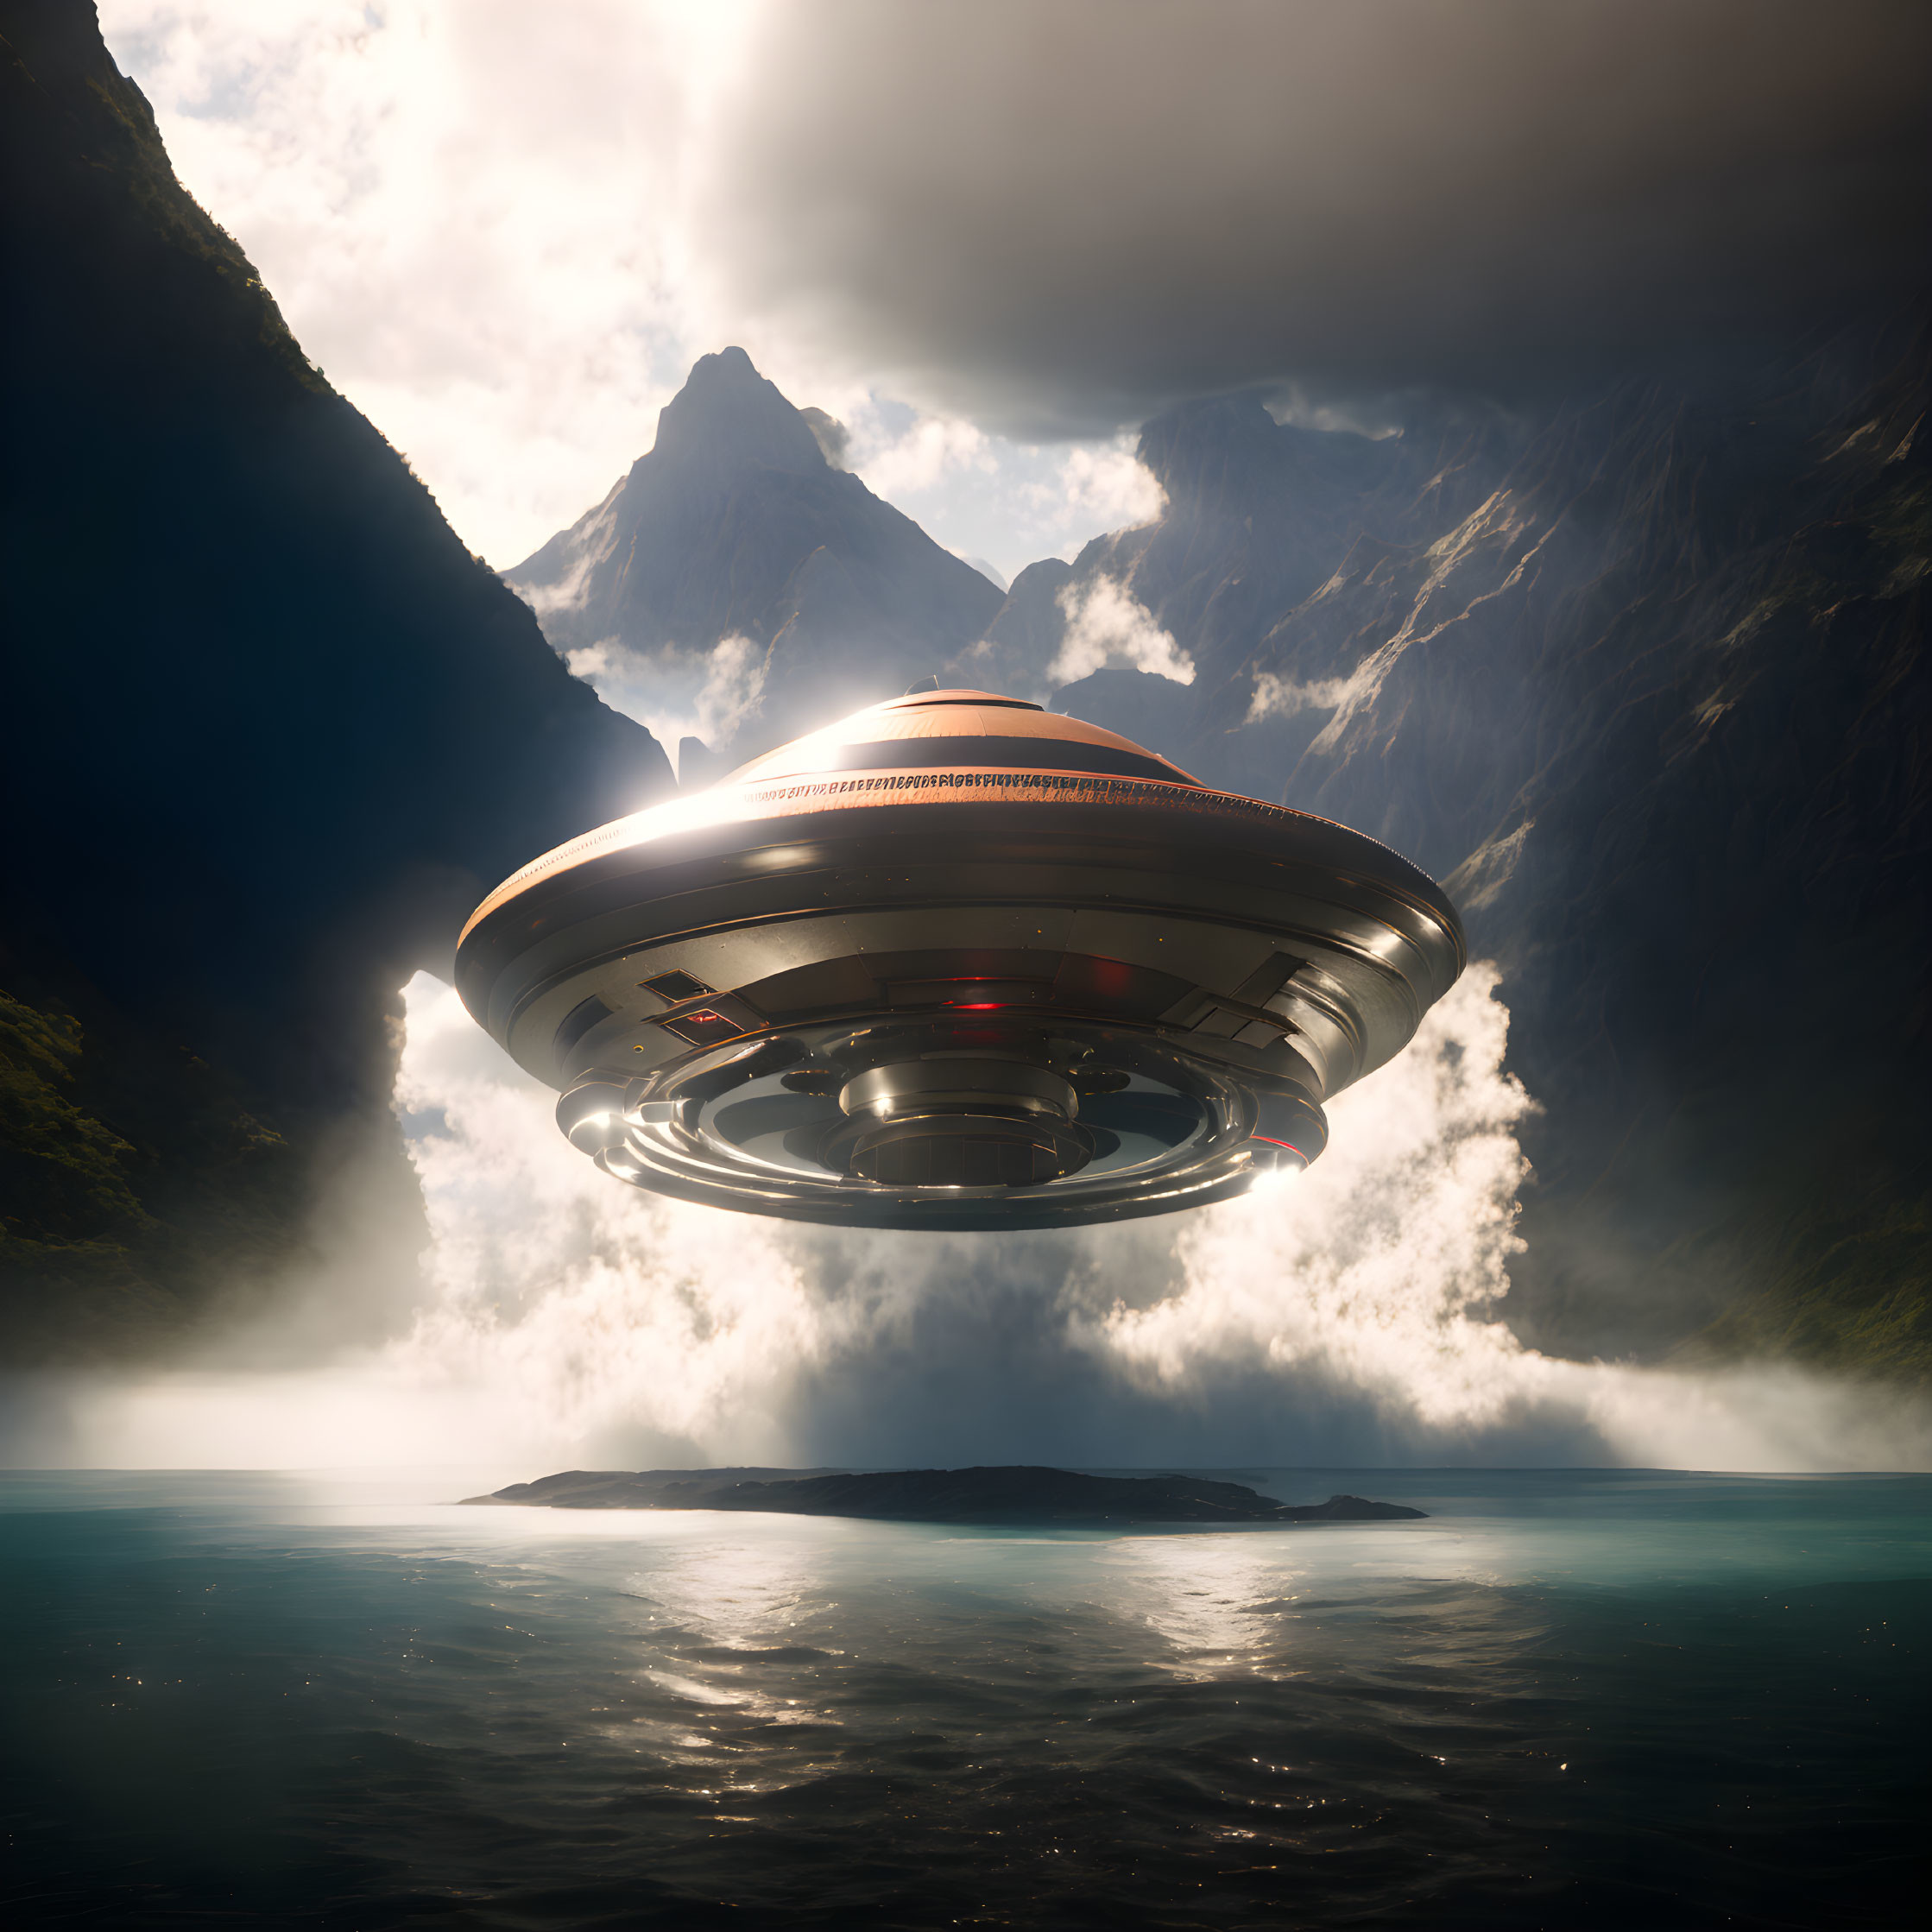 Metallic UFO hovers over serene landscape with mountains, water, and mist